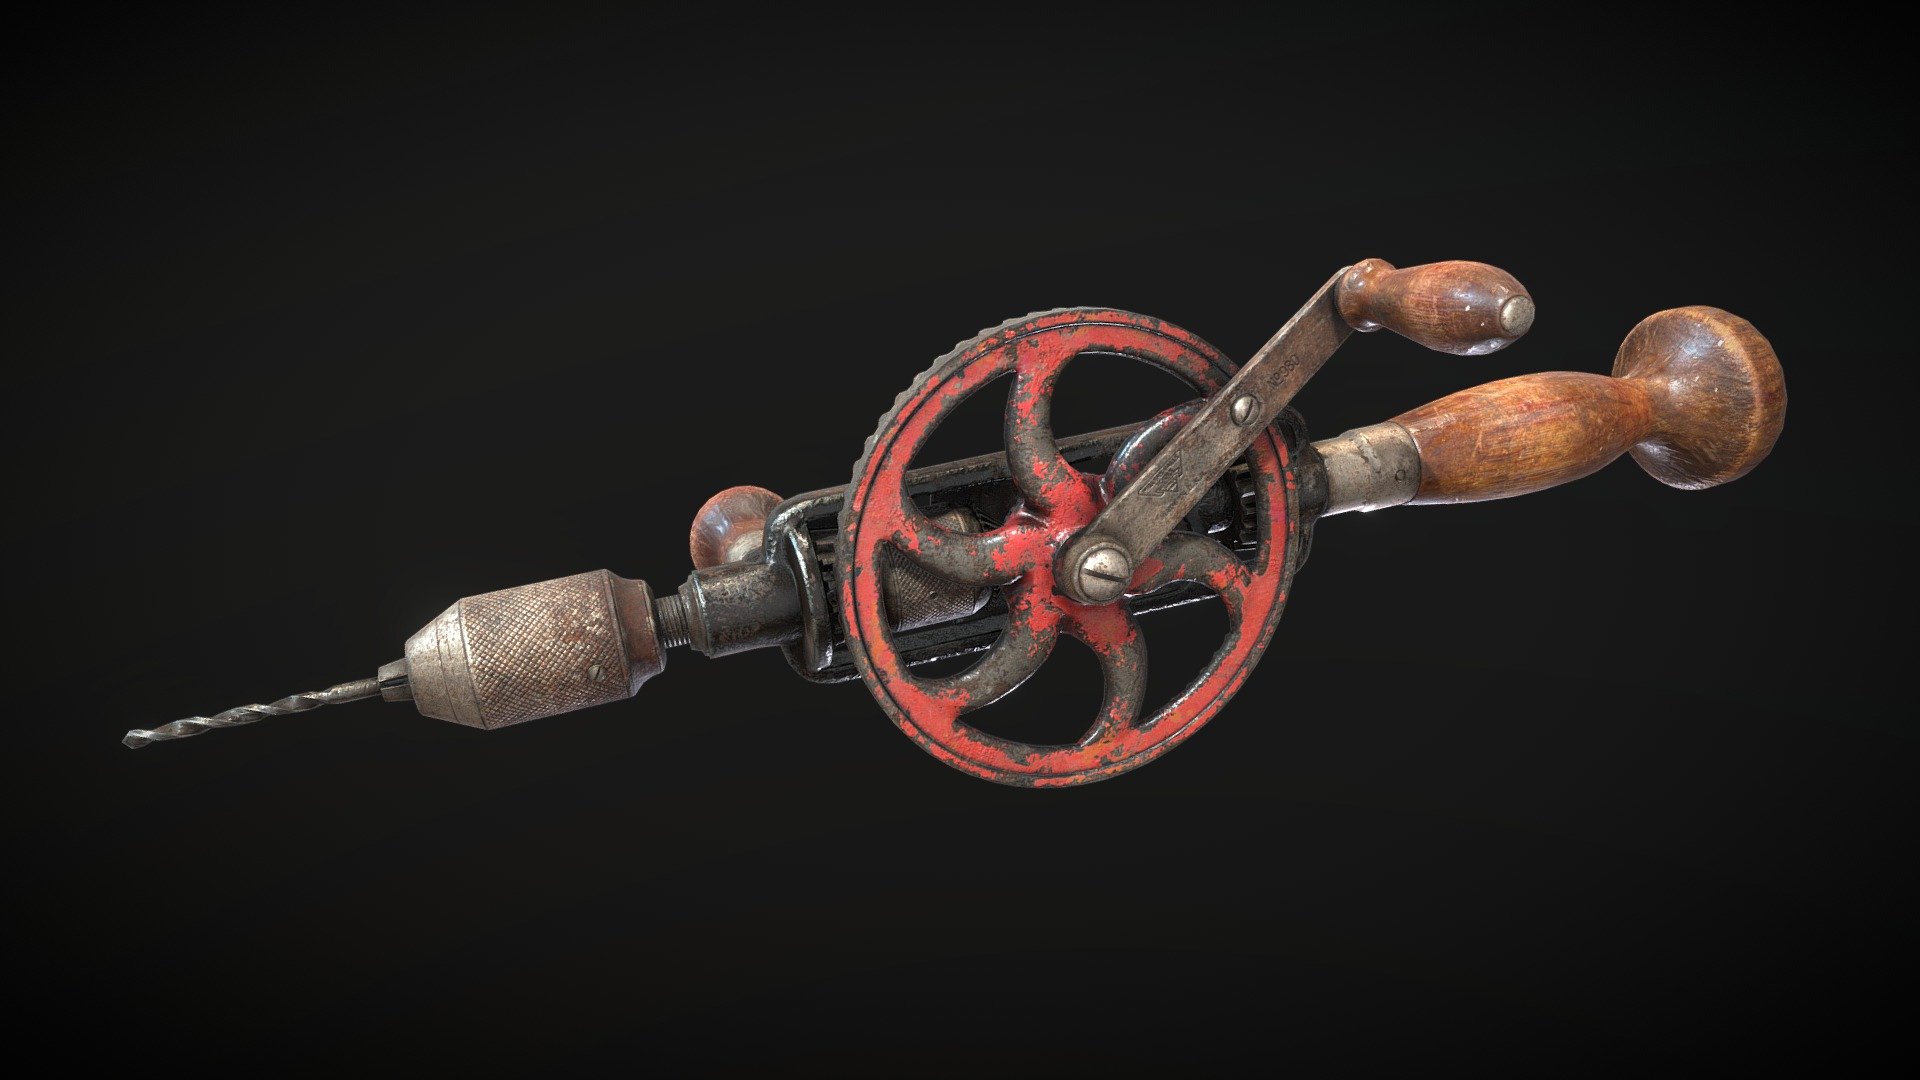 Eggbeater drill from Millers Falls Company. Modelled in Maya, and textured in Substance Painter for Game Asset Pipeline course at Howest.

You can checkout my artstation post here: https://www.artstation.com/artwork/3qBB8o - Millers Falls No. 980 Drill | Game Ready Model - Download Free 3D model by kennethtzh 3d model